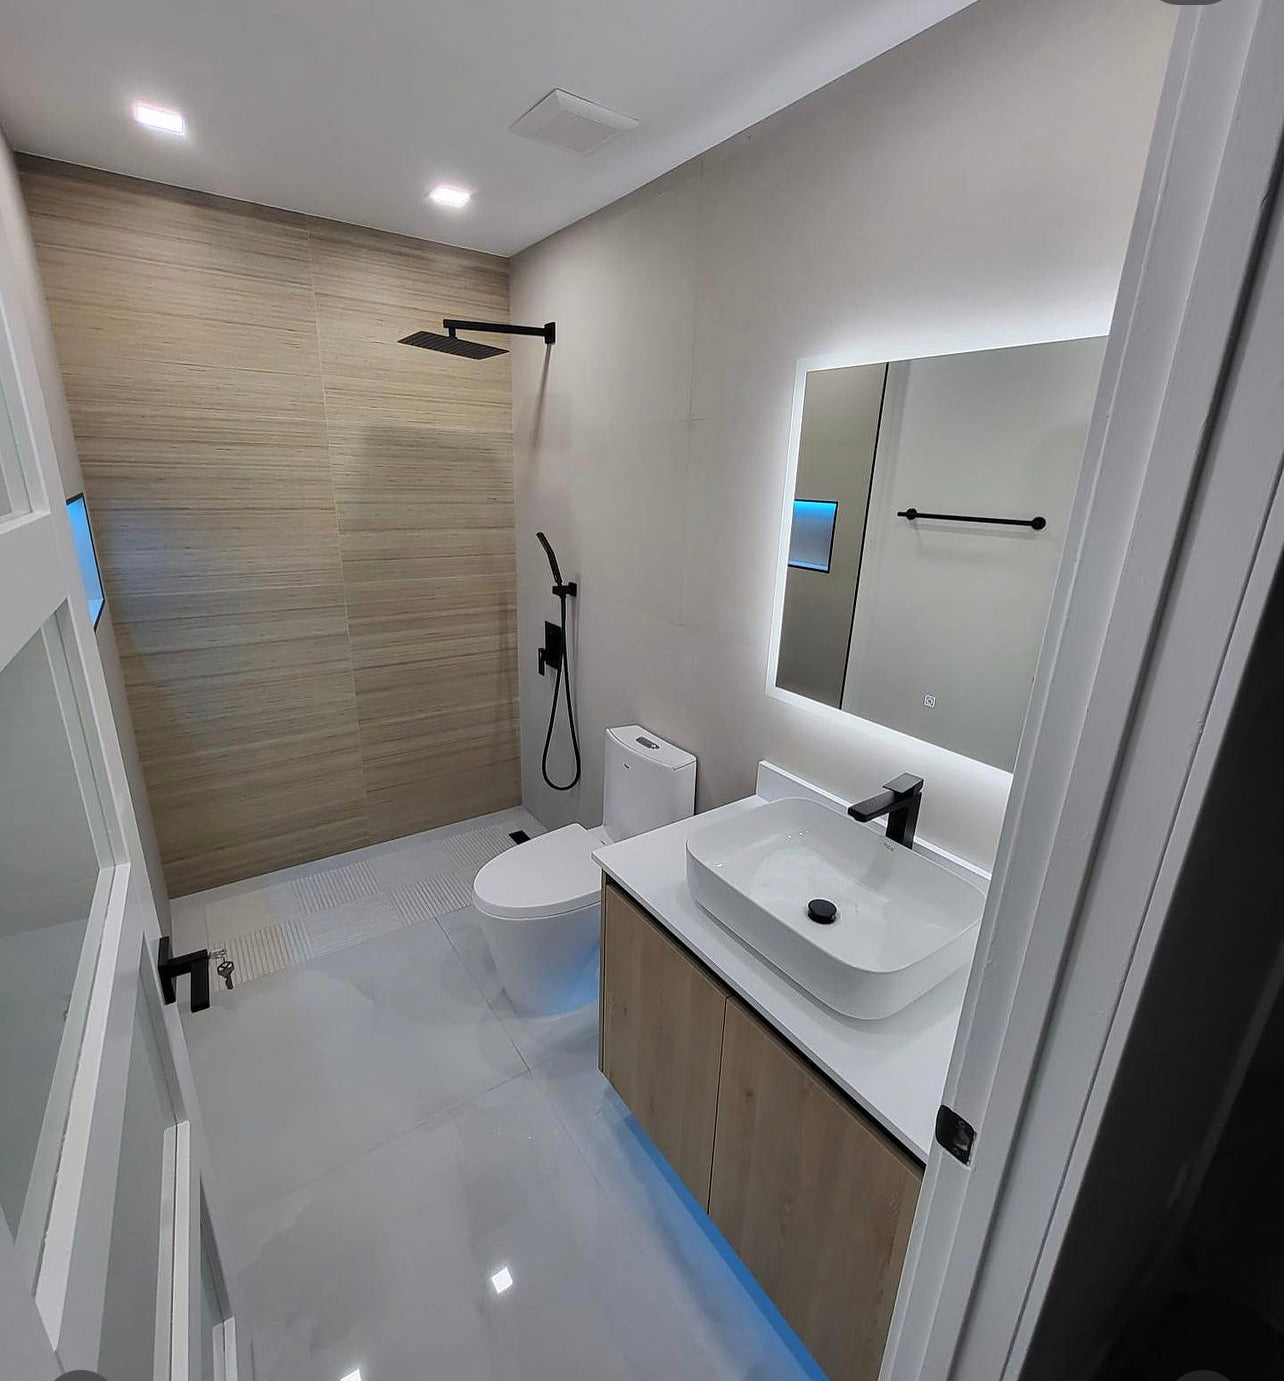 Bathroom  Remodeling  With Shower